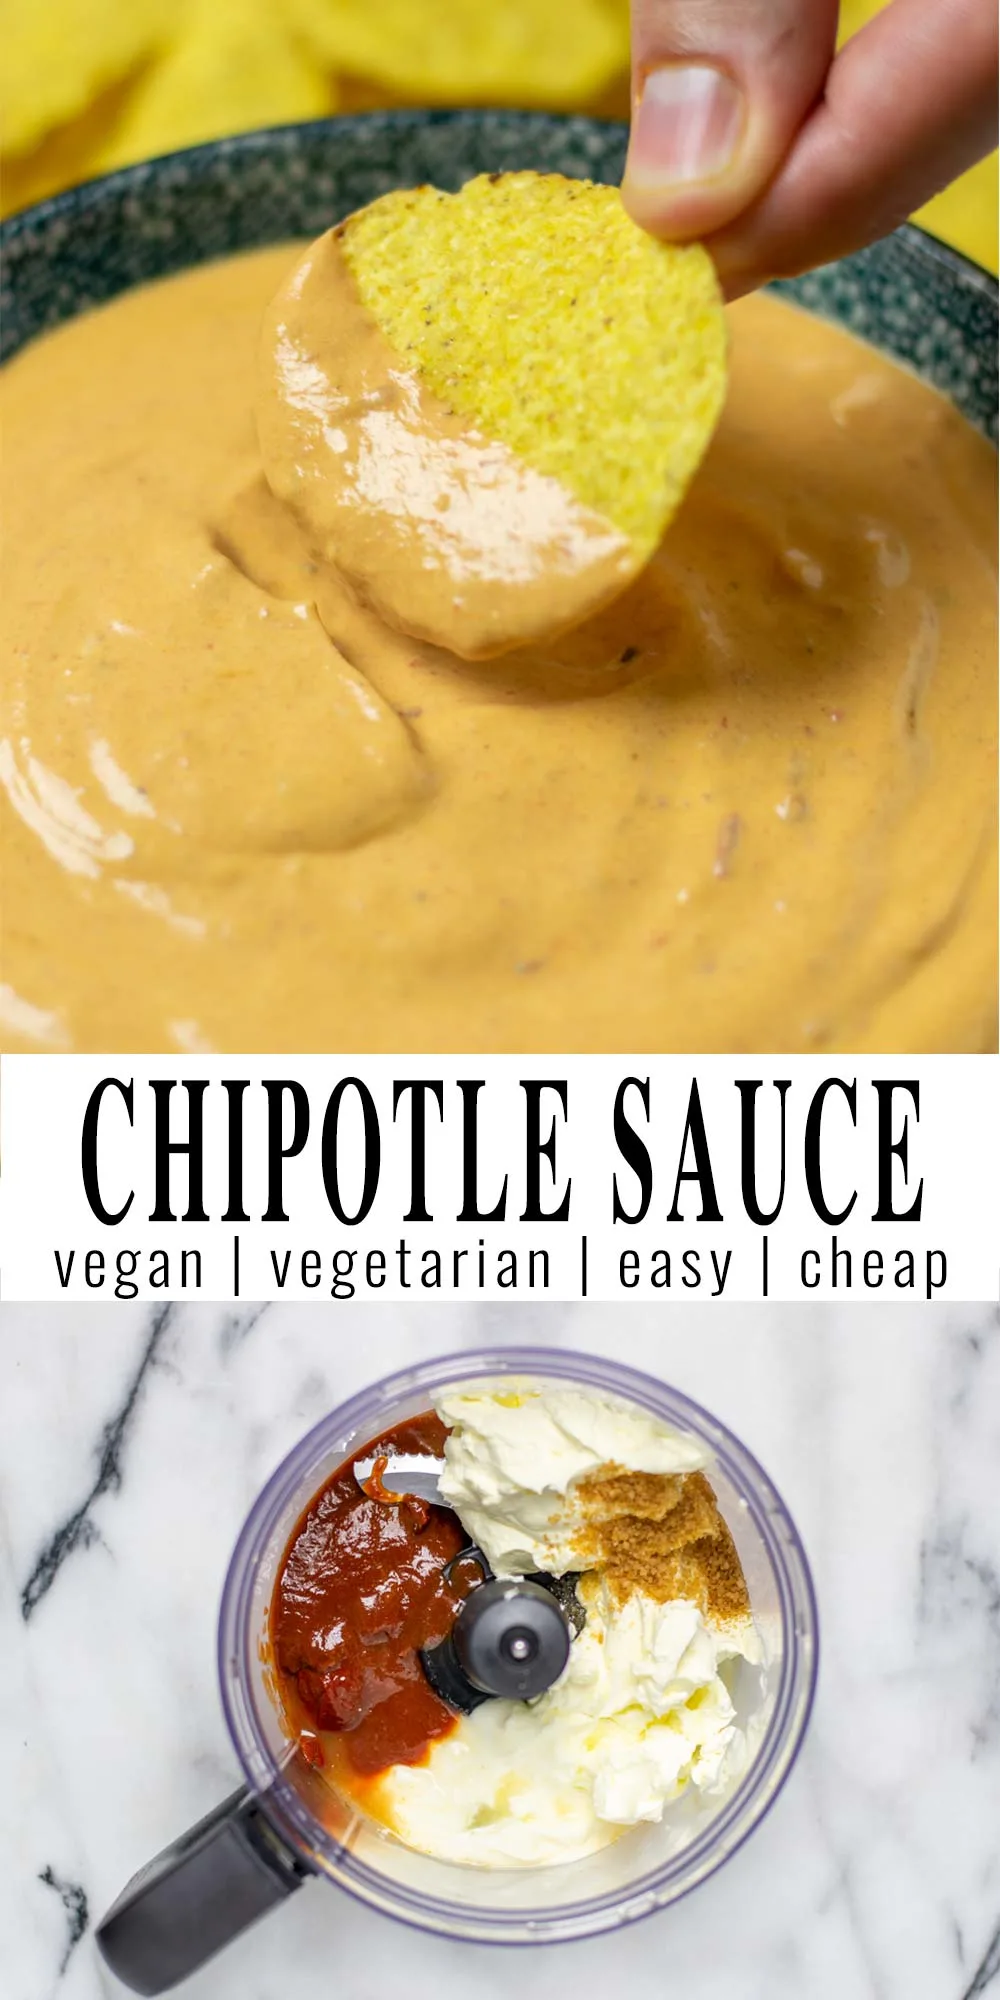 Collage of two pictures of the Chipotle Sauce with recipe title text.